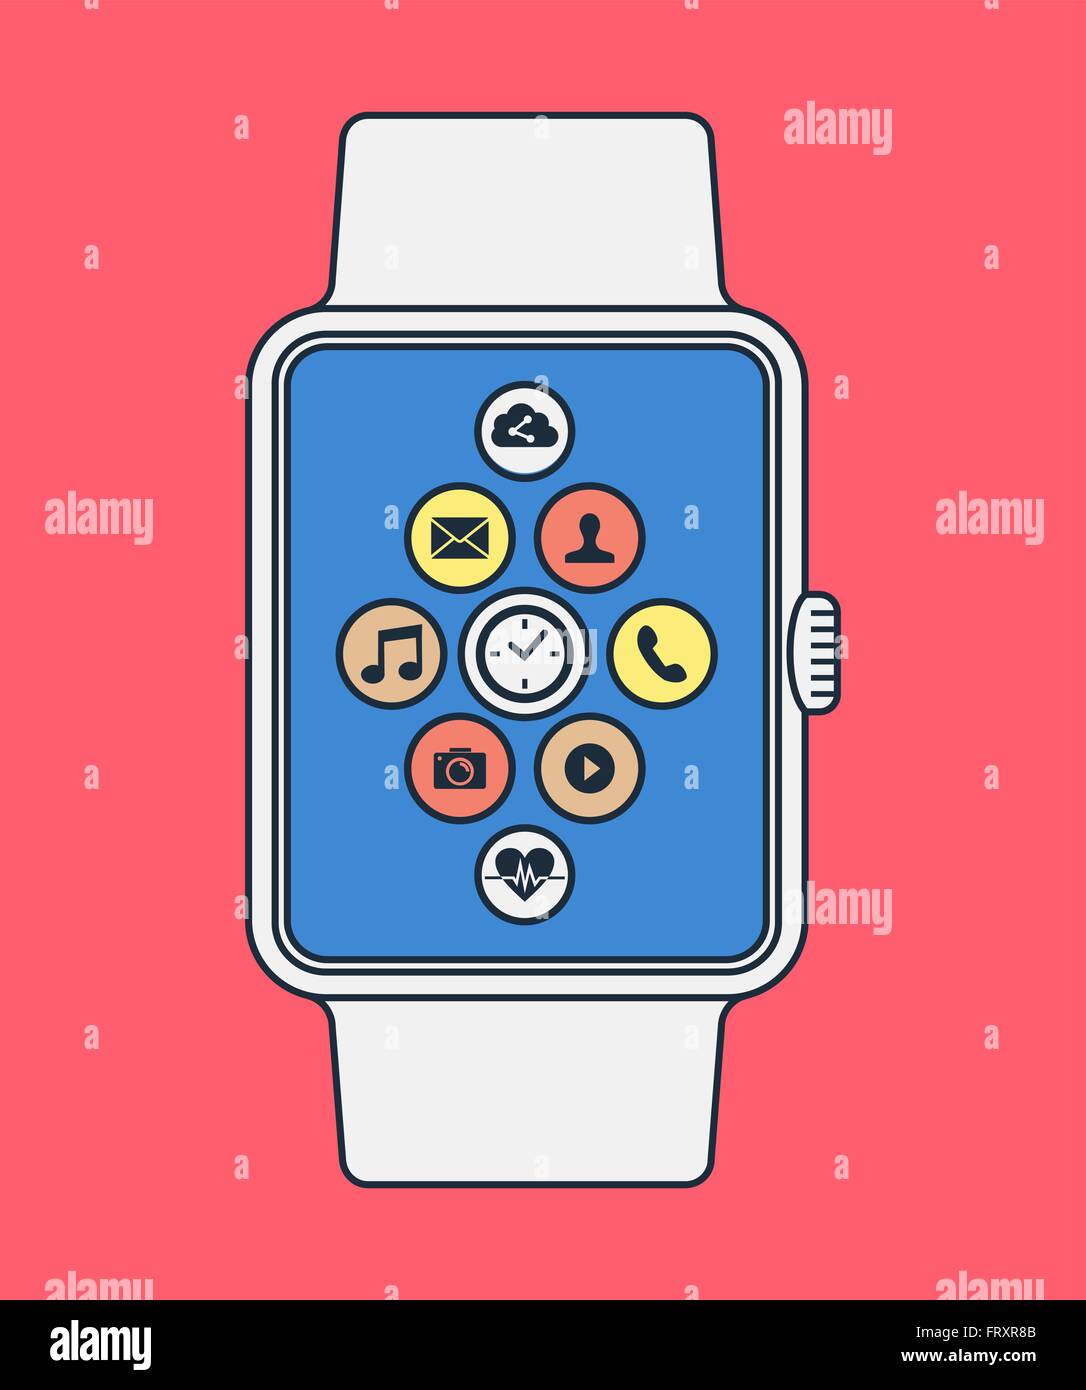 Modern smart watch illustration in line art style with colorful social app icons on screen. EPS10 vector. Stock Vector